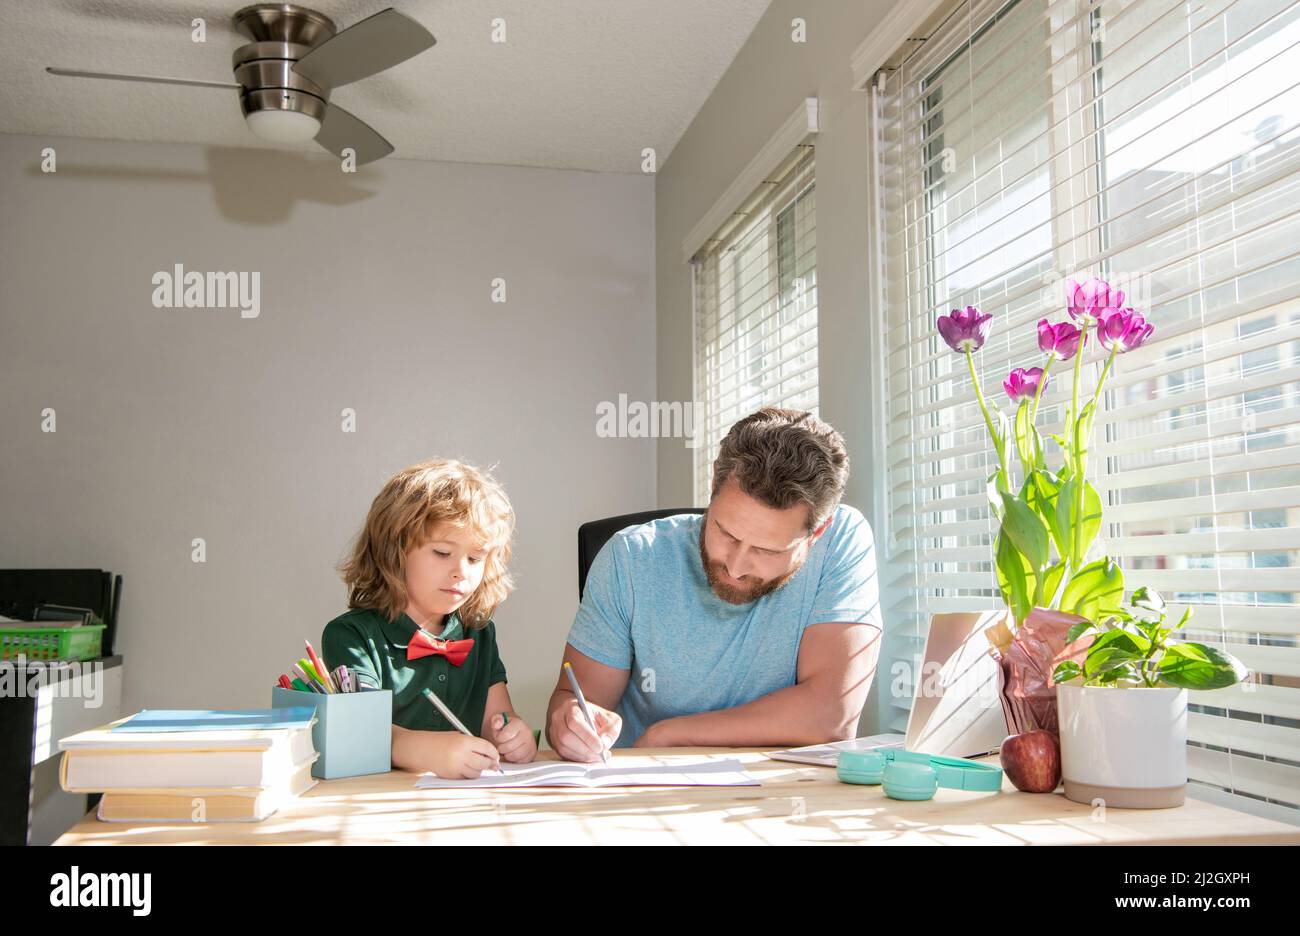 concentrated boy study with teacher. private drawing lesson. education concept. Stock Photo